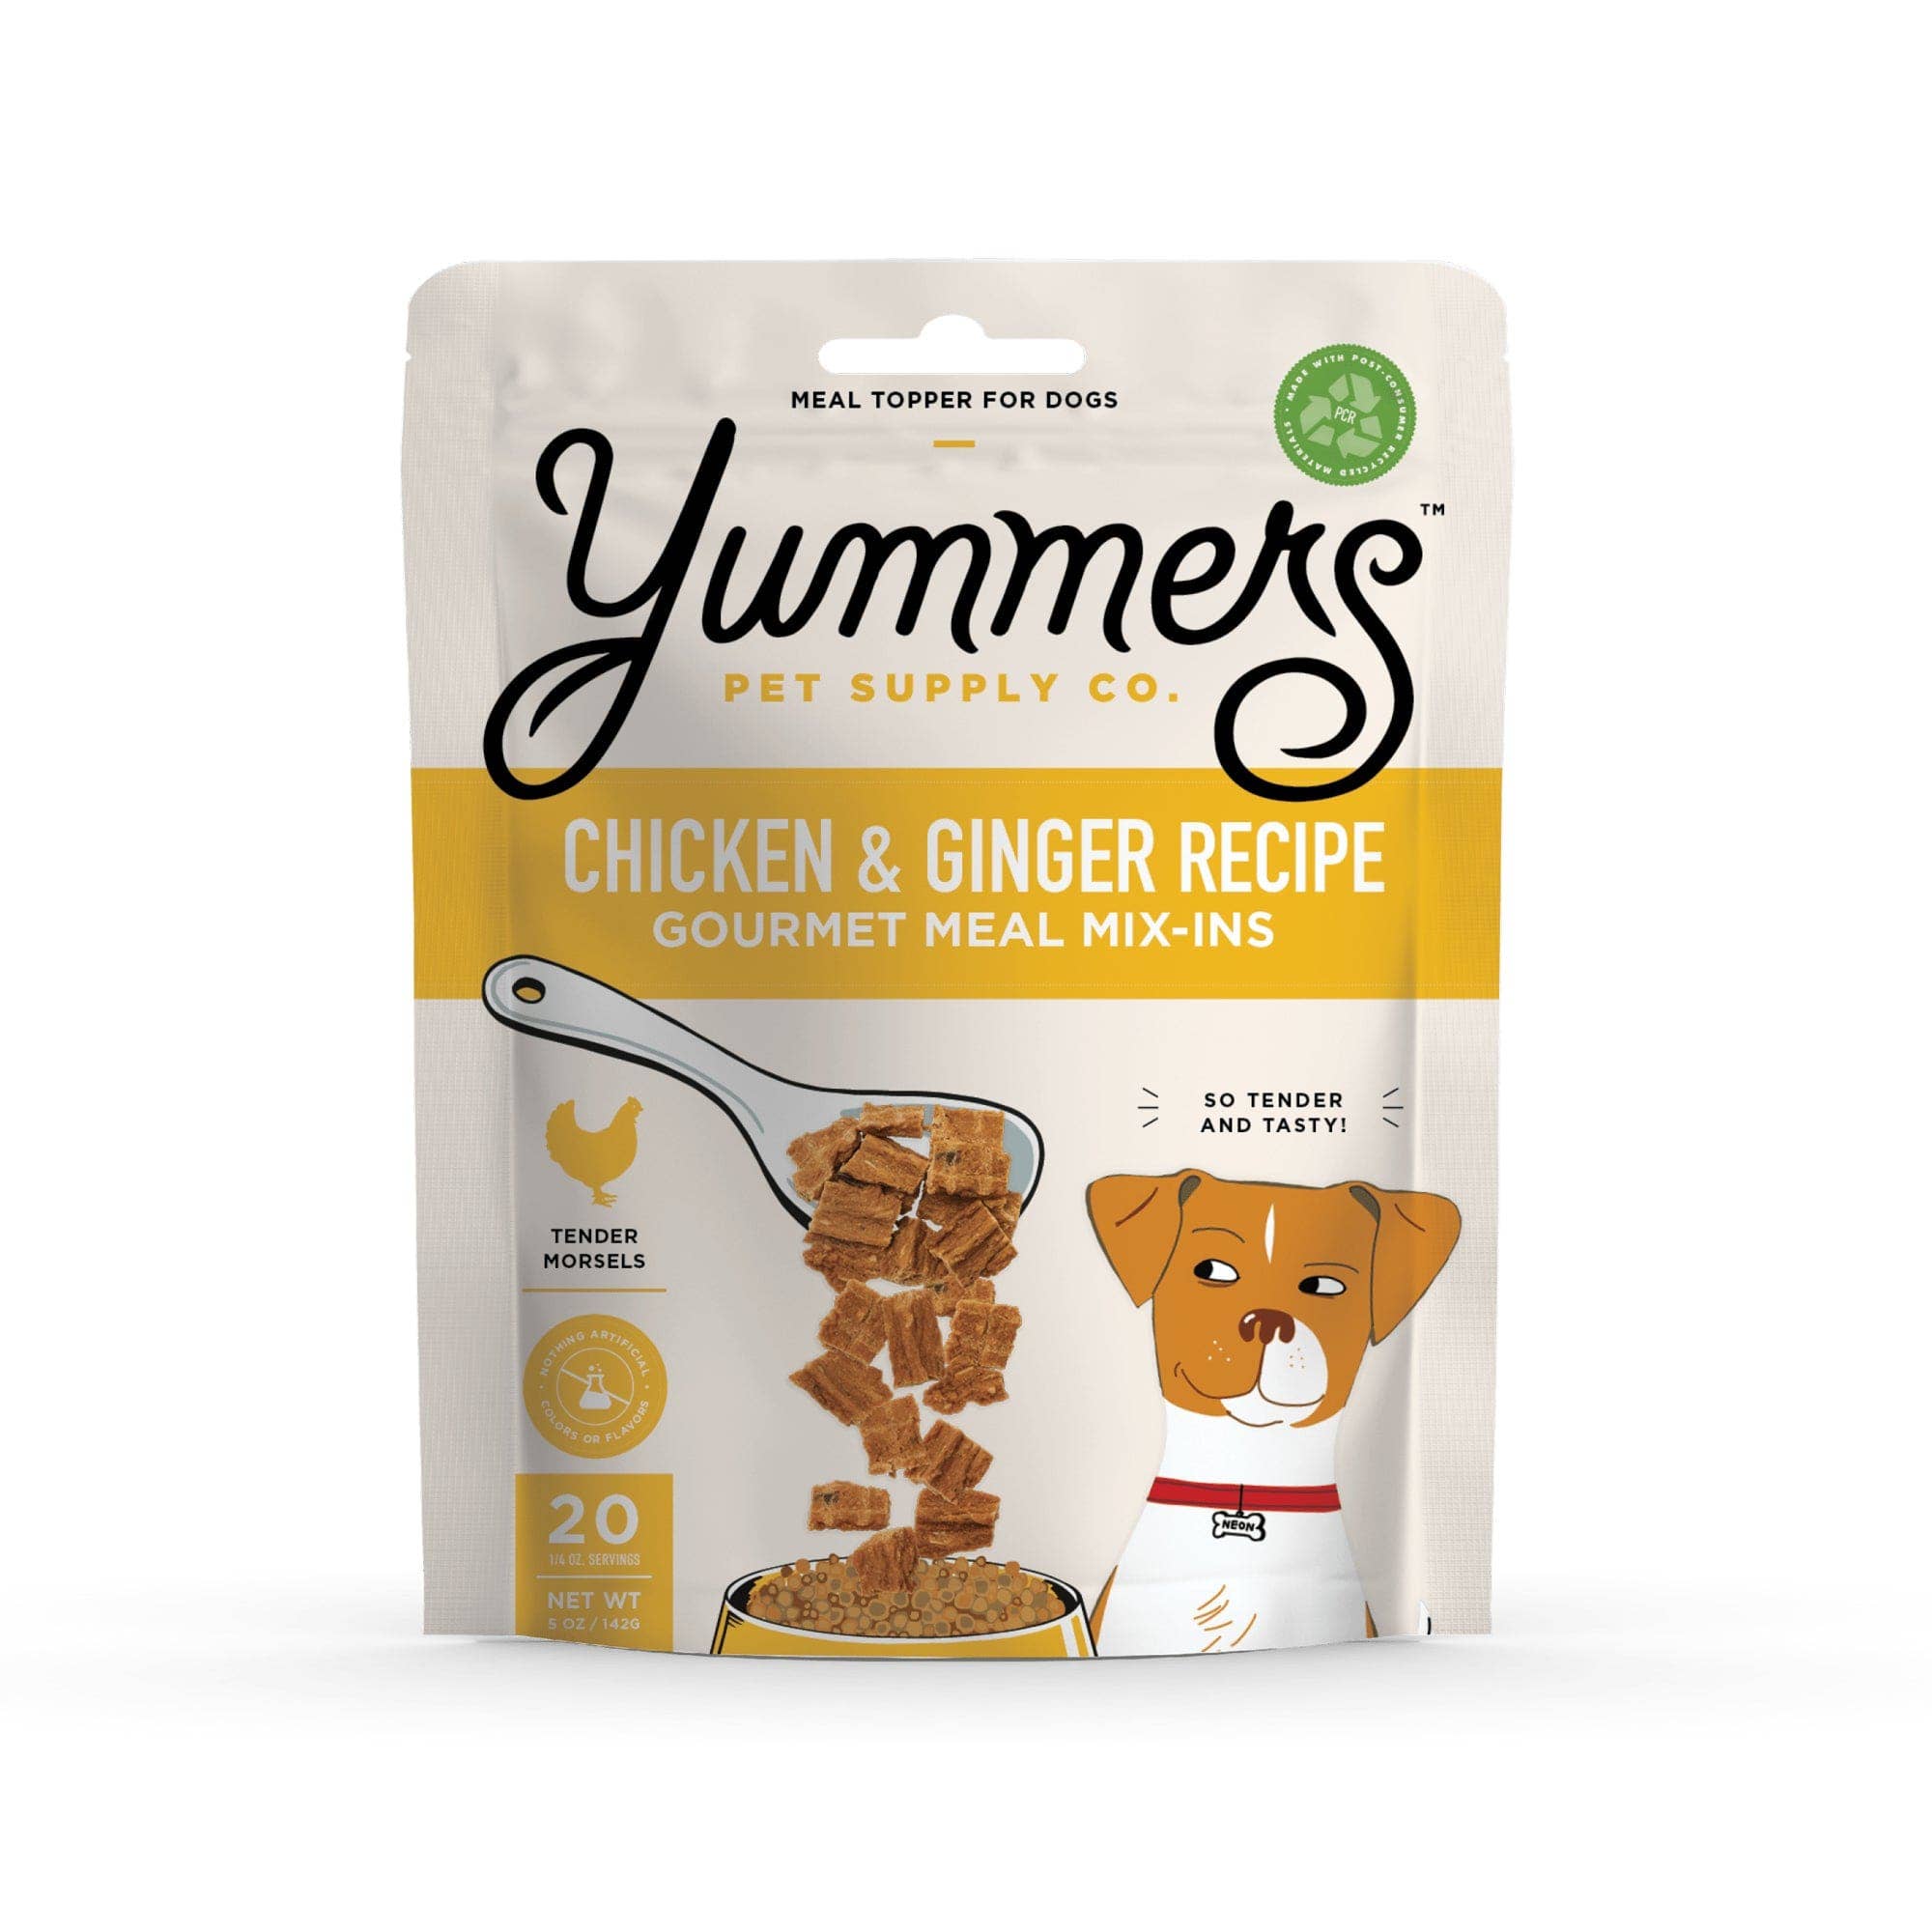 Yummers - Chicken & Ginger Recipe Gourmet Meal Mix-in for Dogs, 5 oz.